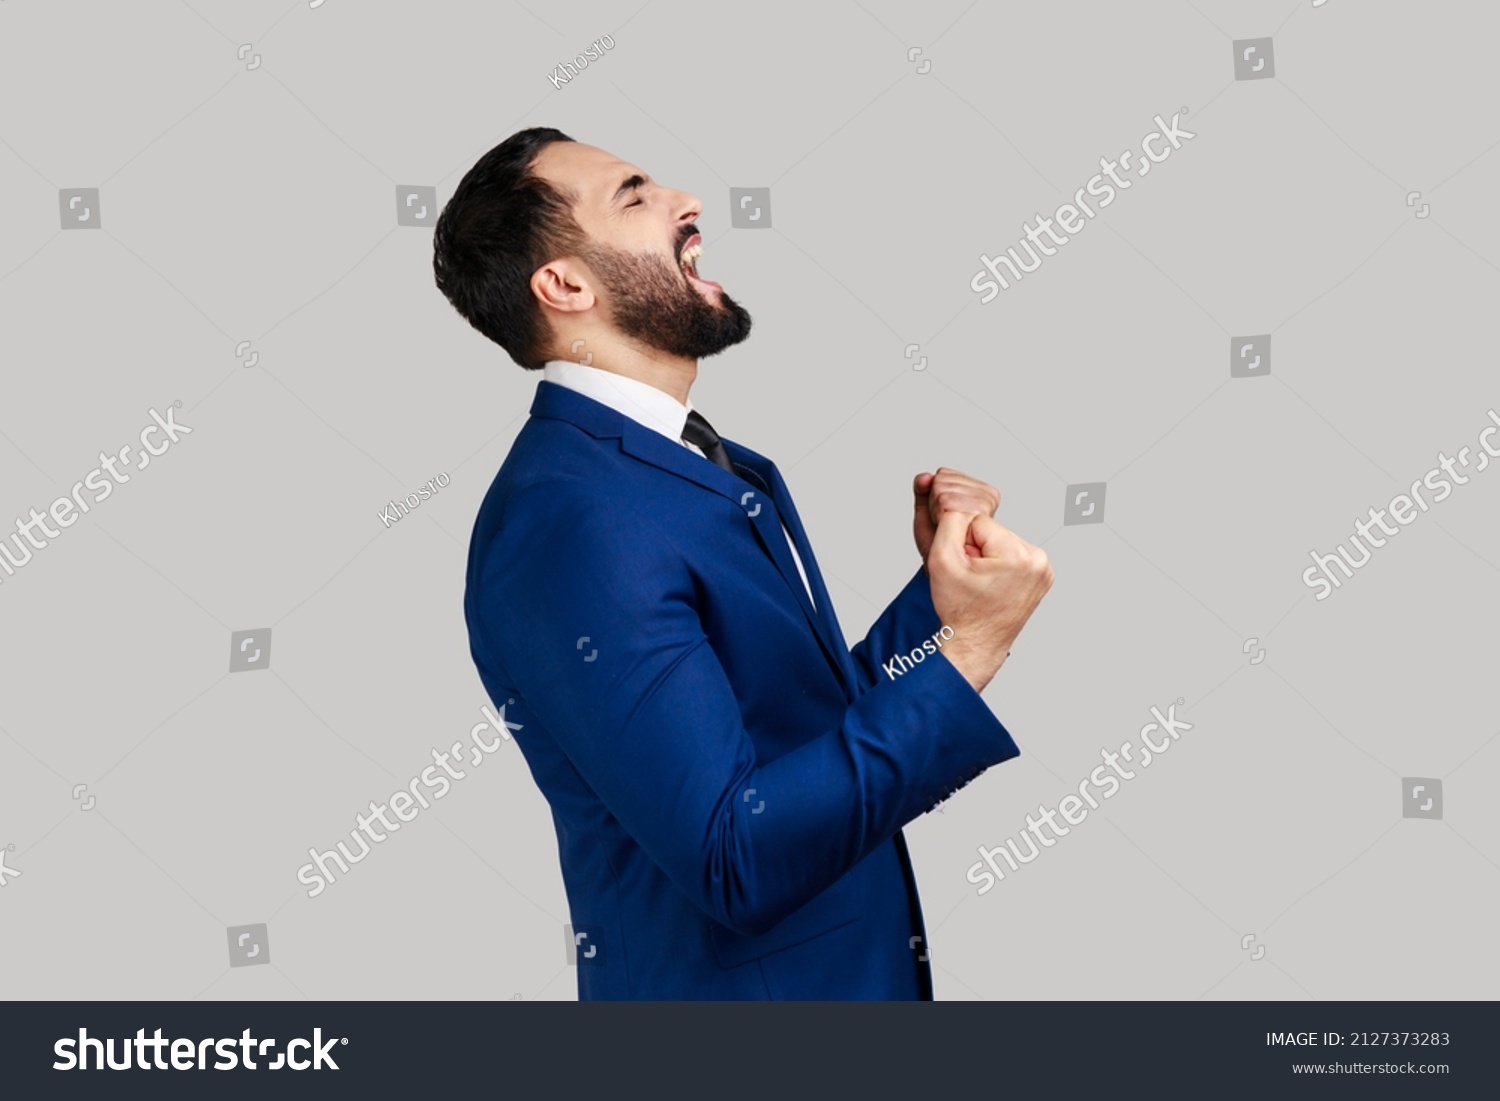 Side view of bearded man showing yes gesture and screaming celebrating his victory, success, dreams comes true, euphoria, wearing official style suit. Indoor studio shot isolated on gray background. #2127373283